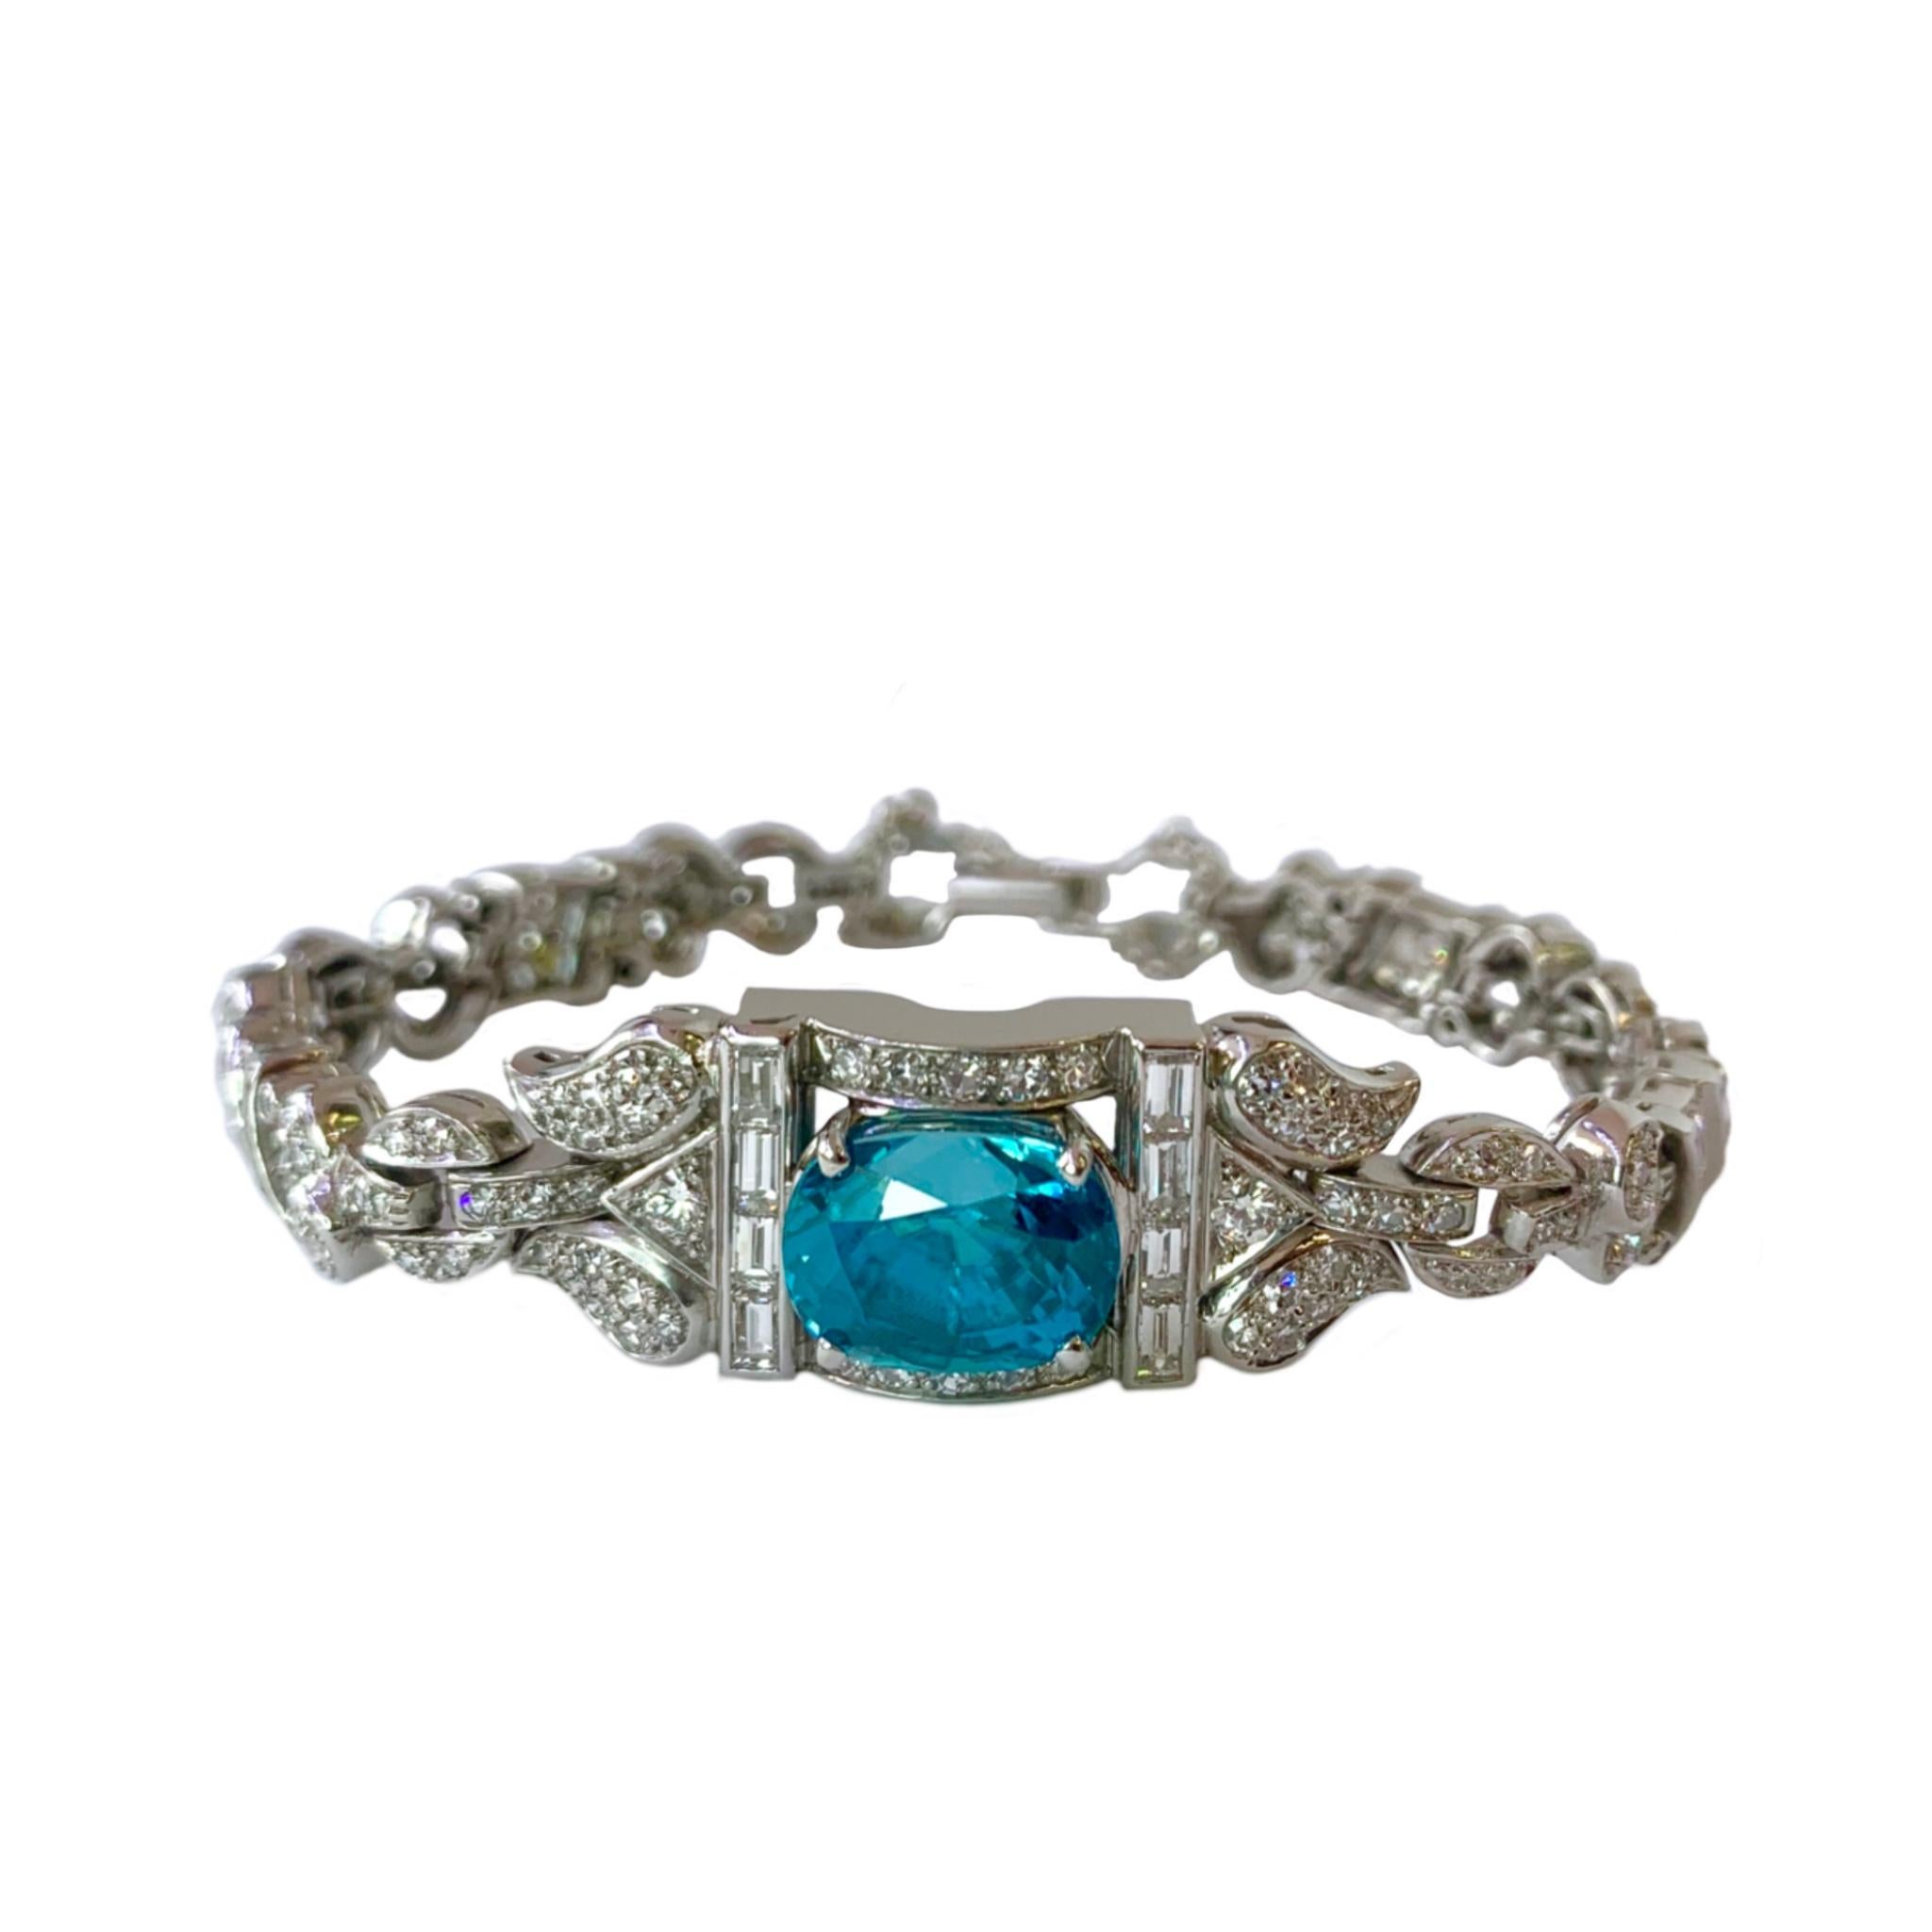 This incredible platinum bracelet was a watch once-upon-a-time.  It is now set with a marvelous approximately 10 carat Cambodian blue zircon! There are 196 gorgeous, very brilliant baguette and round diamonds with a total weight of approximately